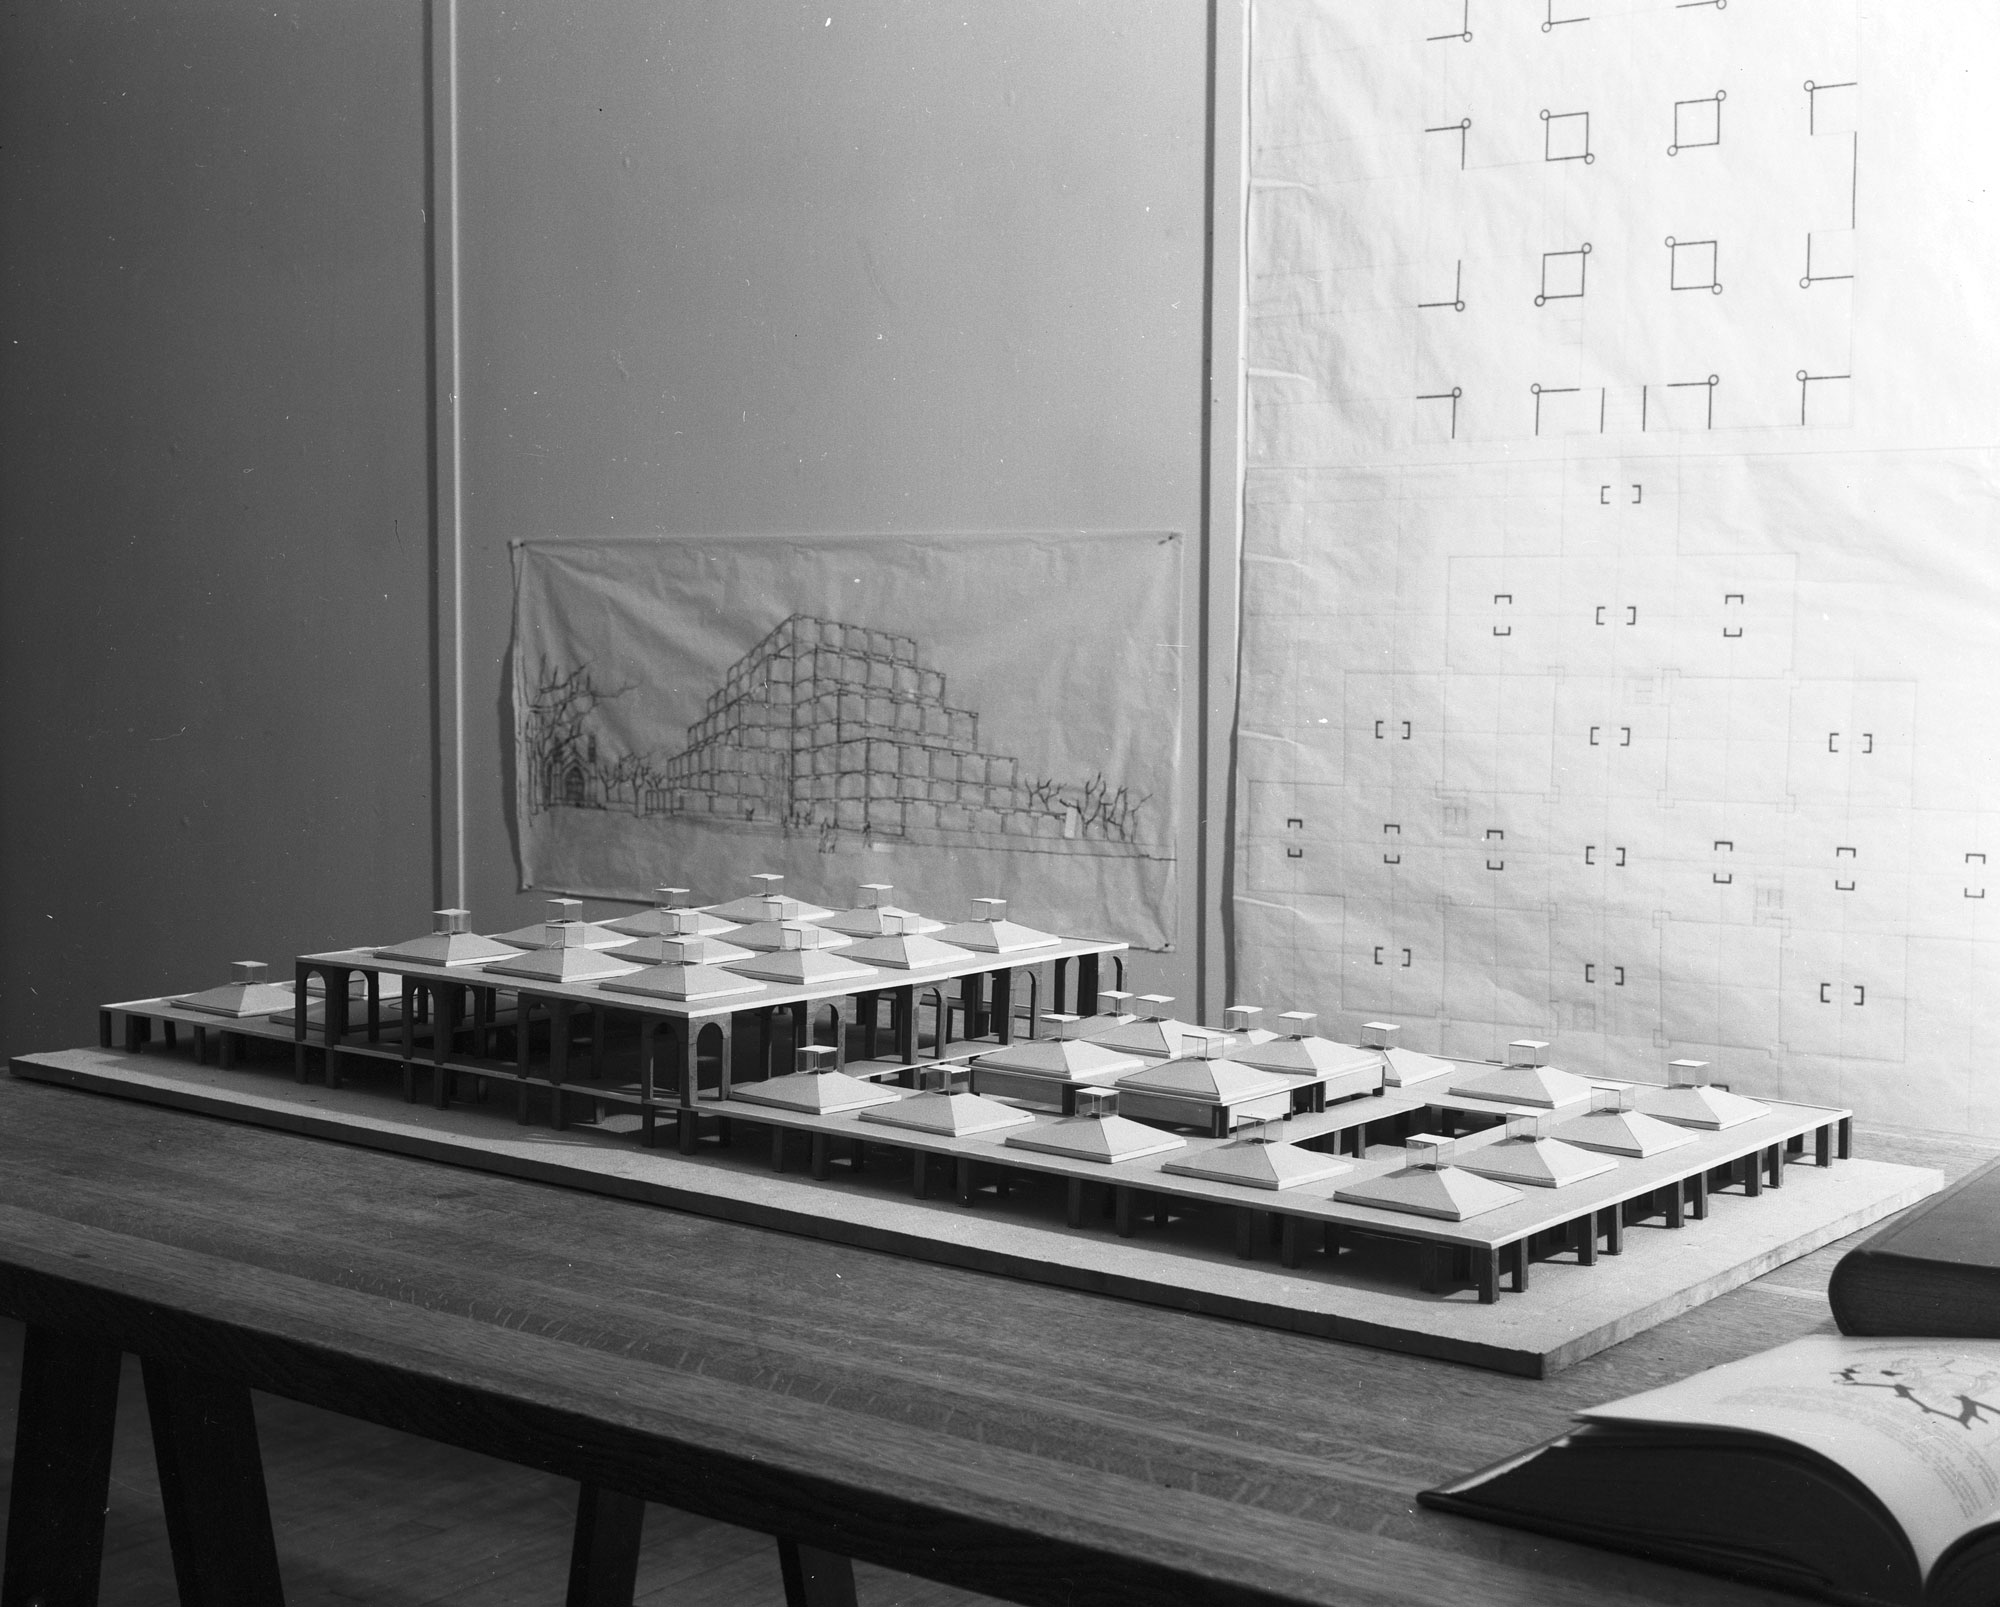 Balck and white photograph of a model for the Jewish Community Center